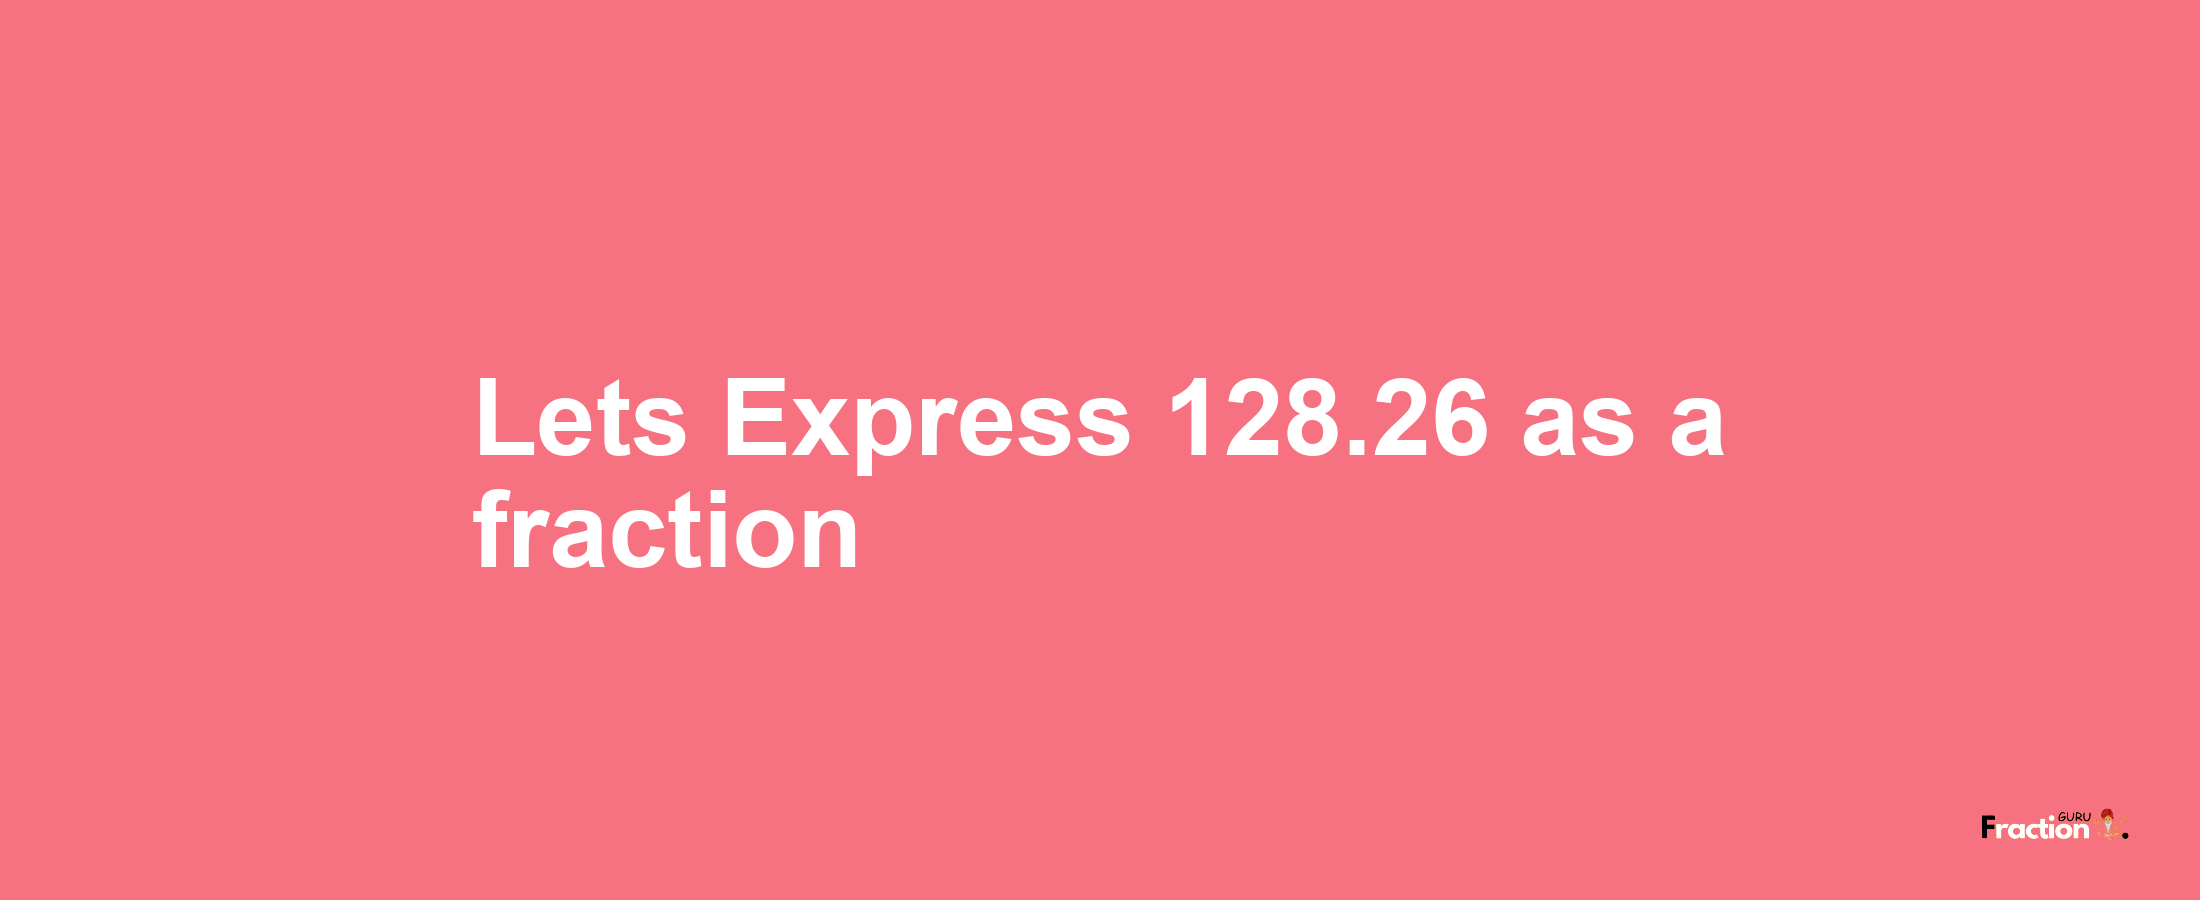 Lets Express 128.26 as afraction